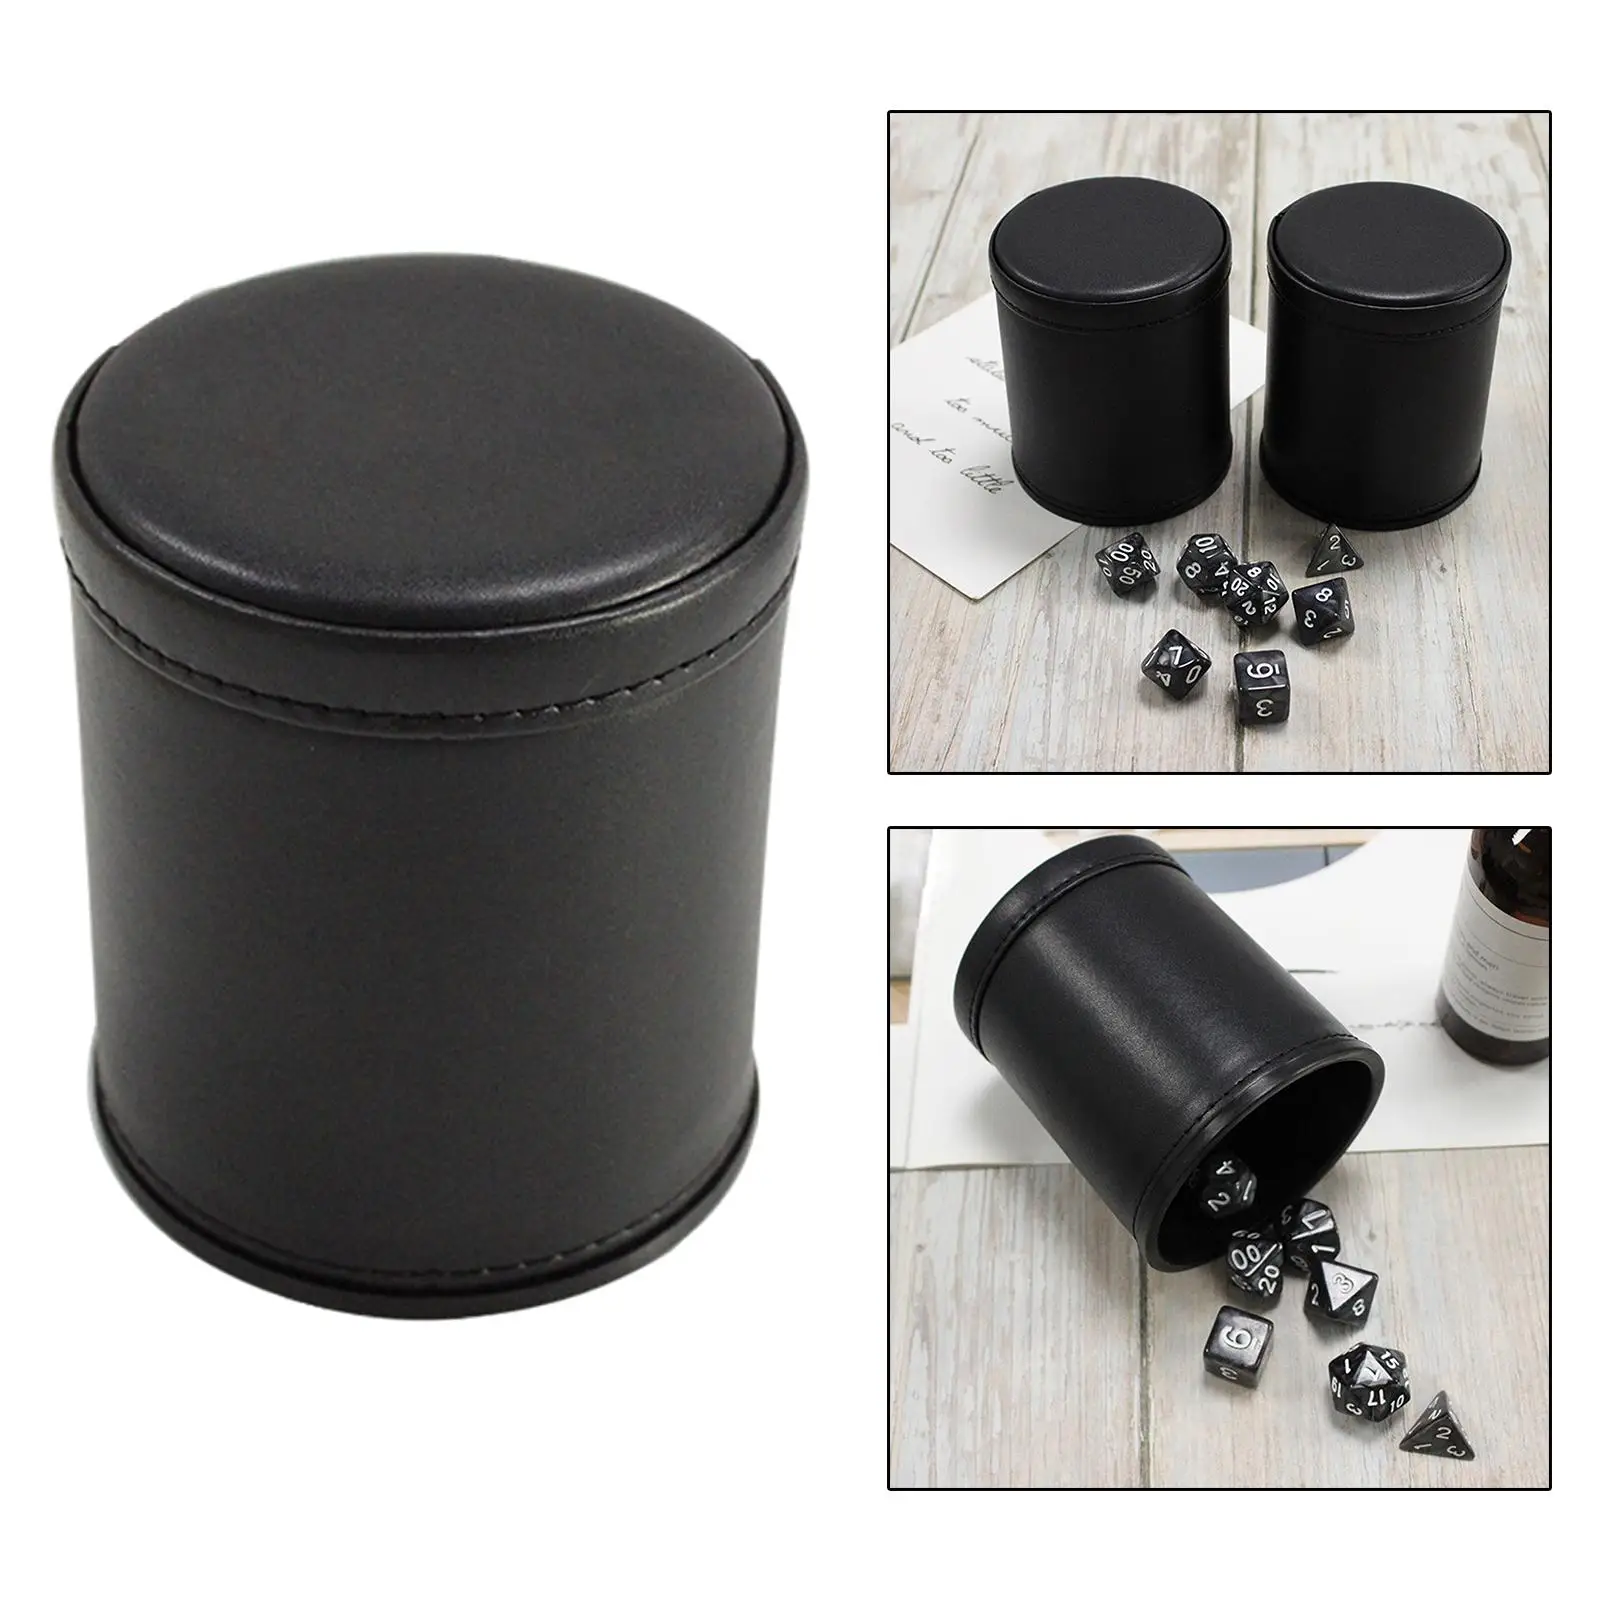 Manual Dice Cup Dice Game Supplies Professional Entertainment Leather Dice Box Dice Decider Dice Shaker for Club Bar Ktv Party